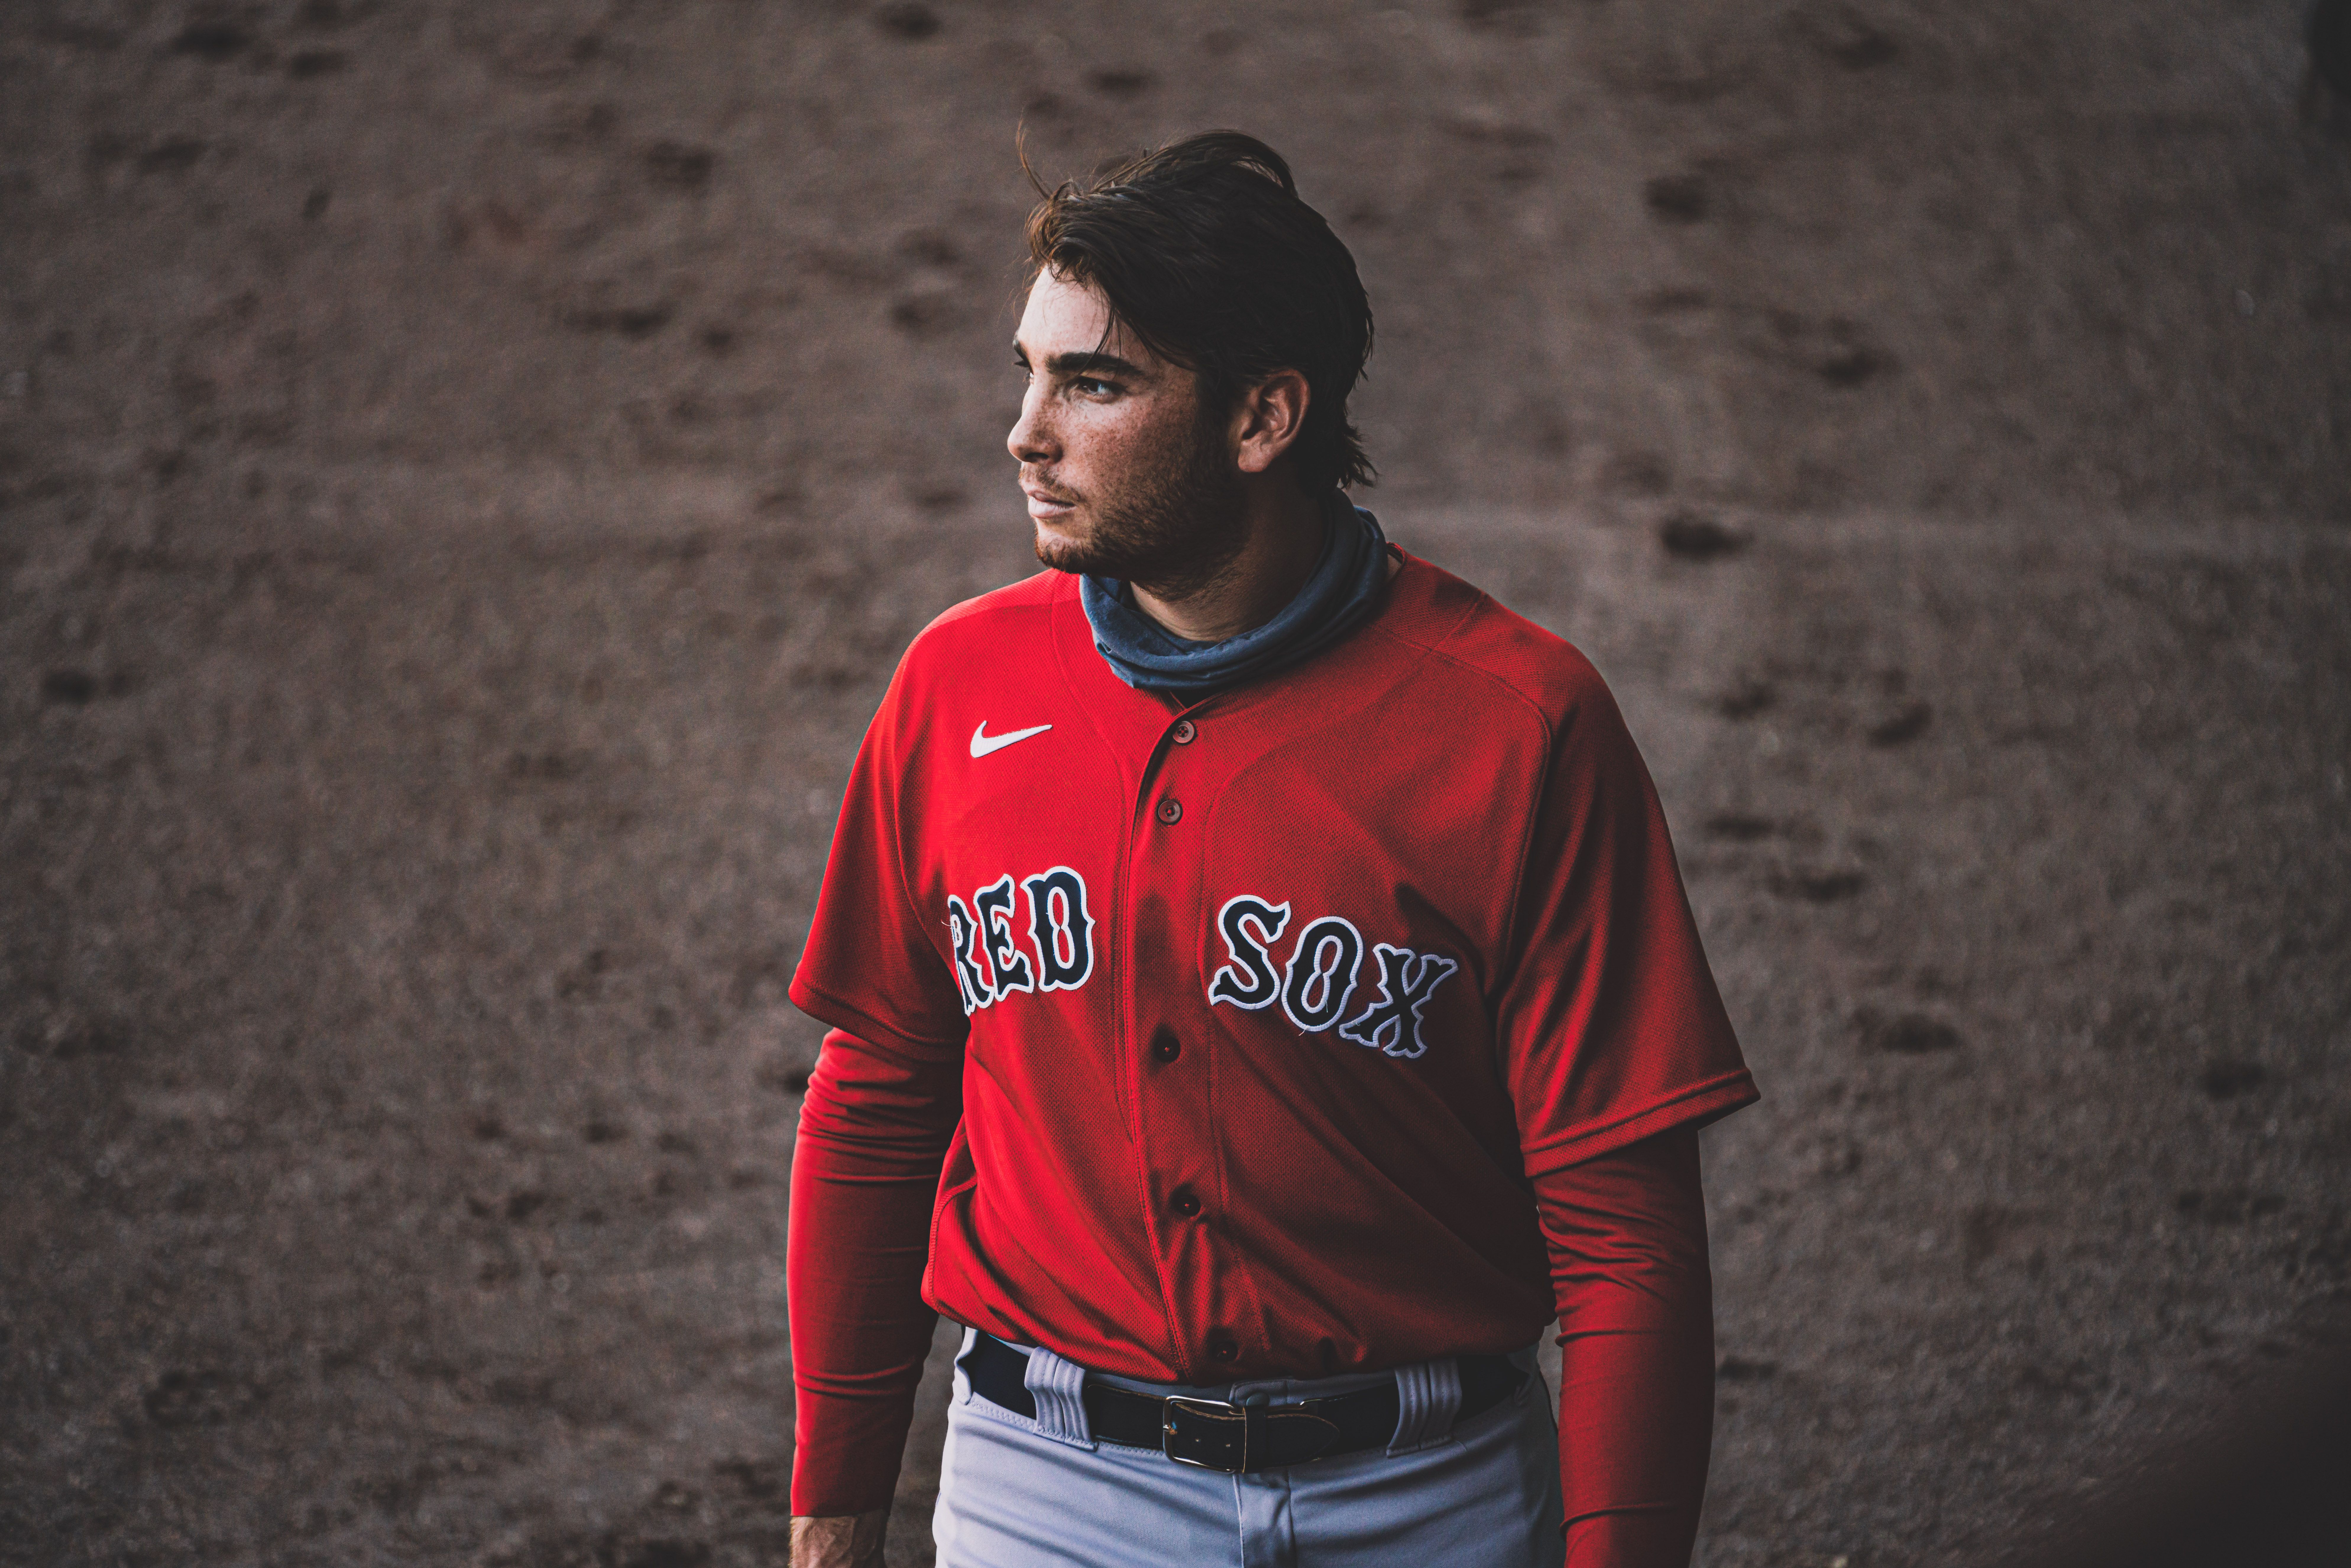 duran red sox jersey